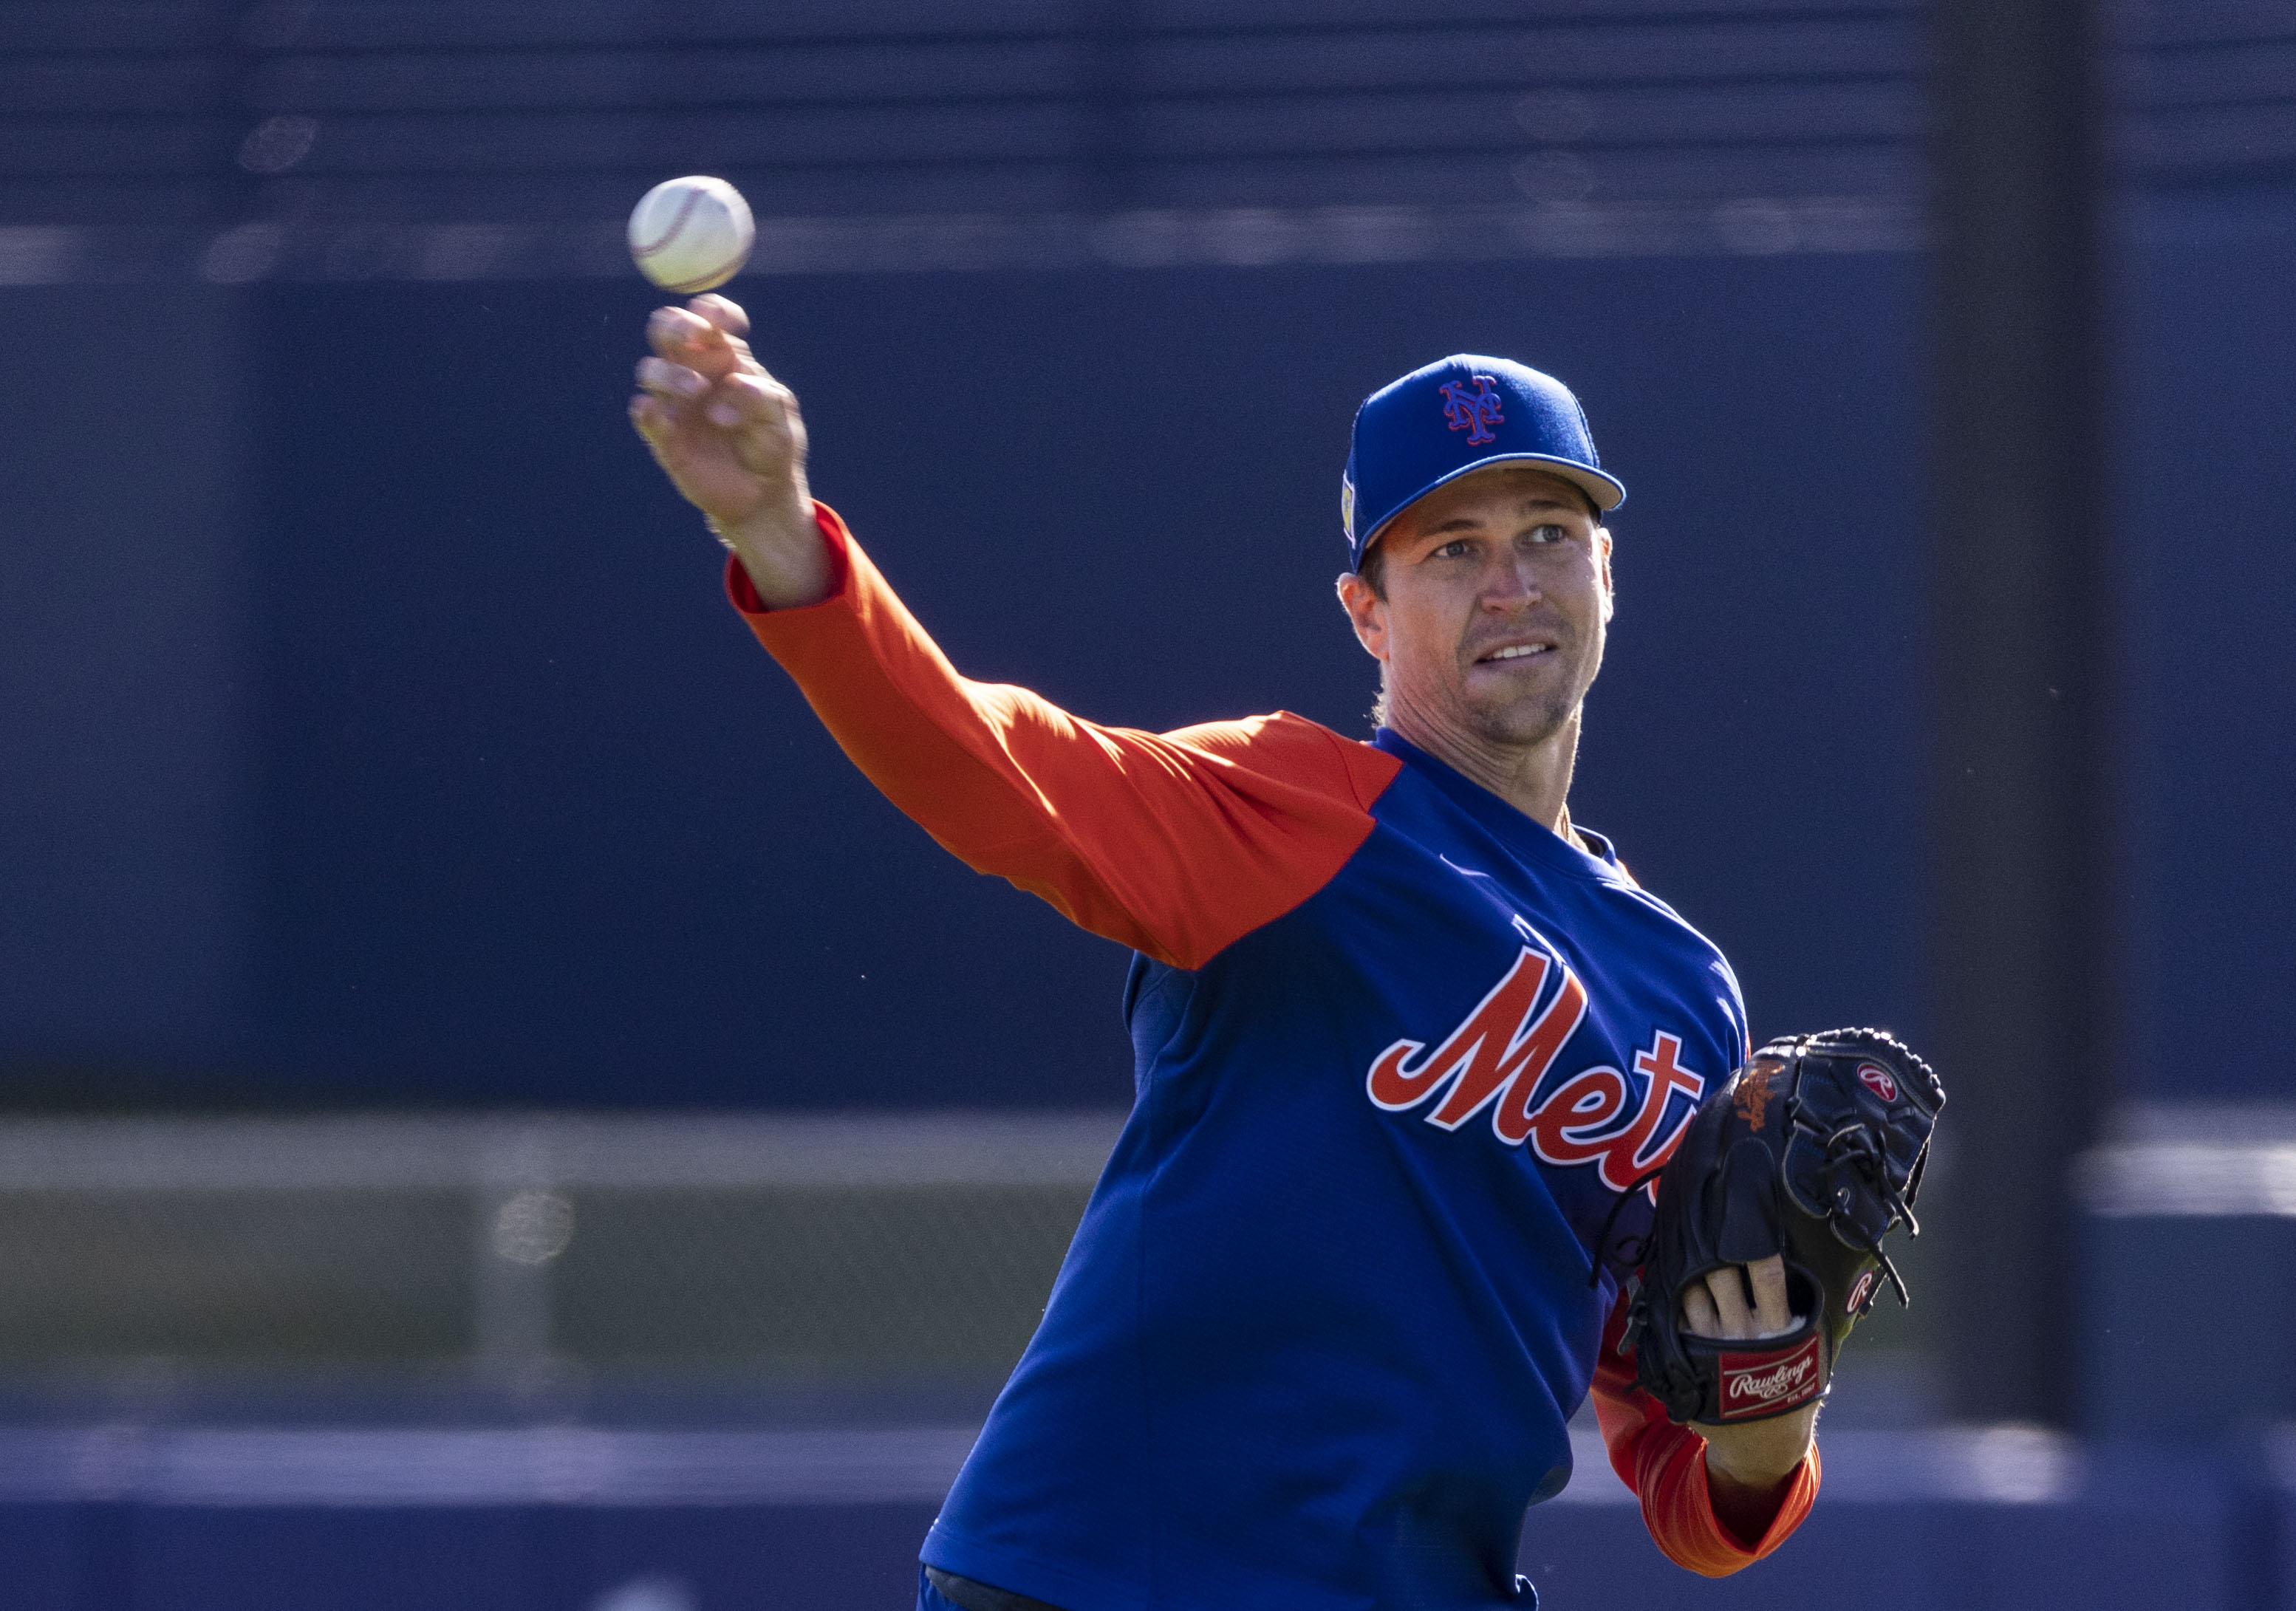 Jacob deGrom is Mets' only All-Star, and he won't pitch there